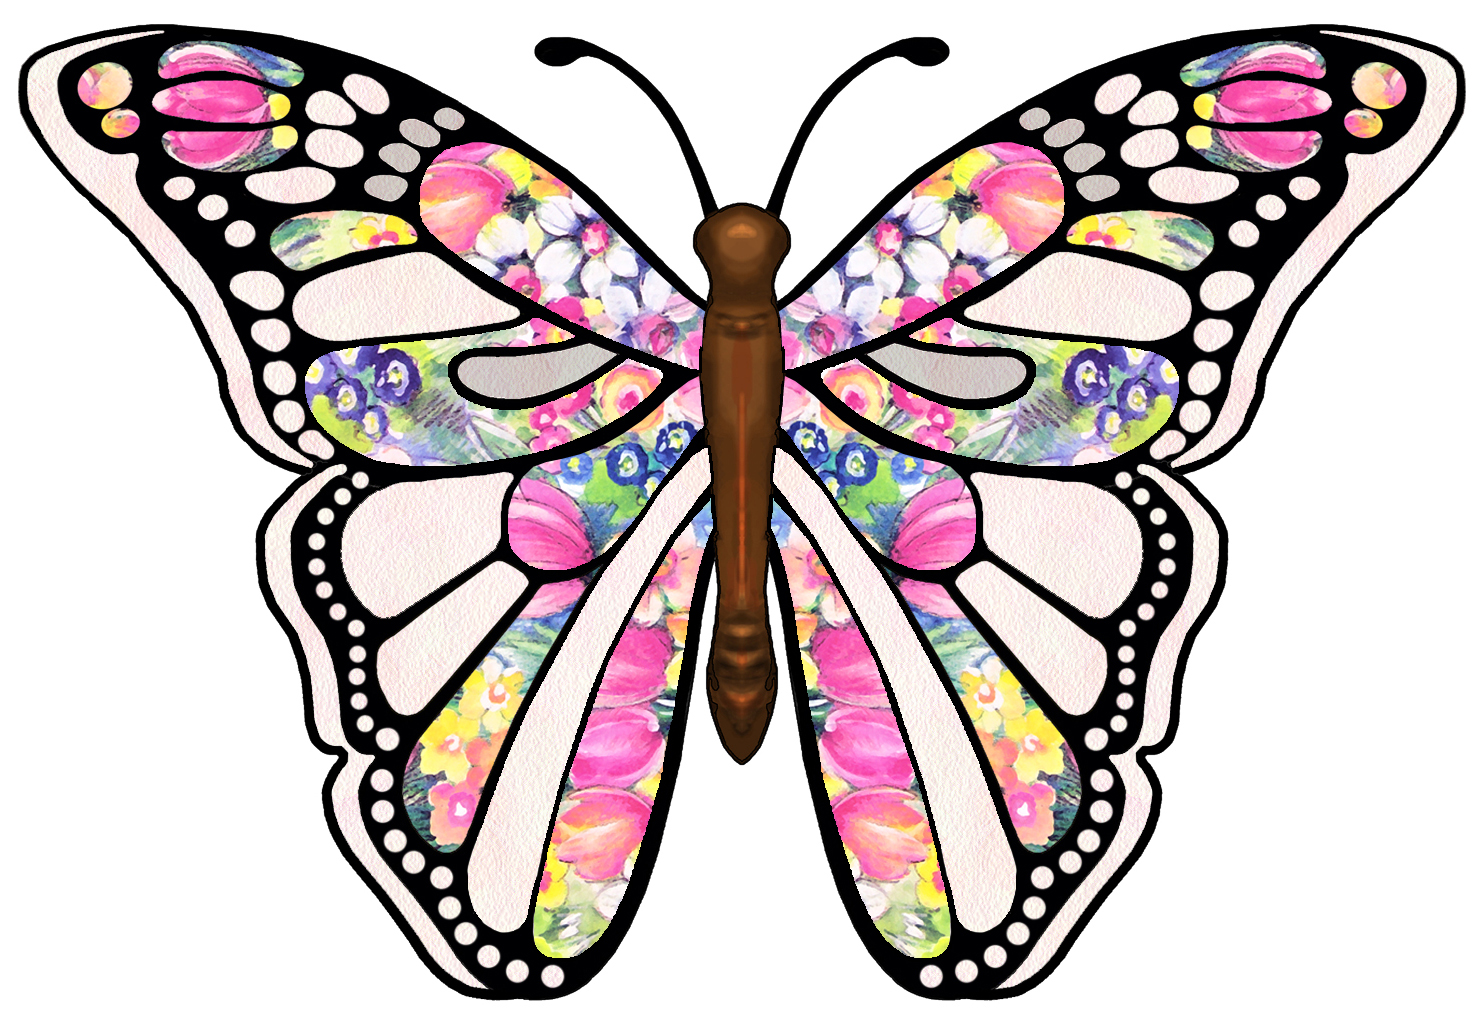 Butterfly Art Images.